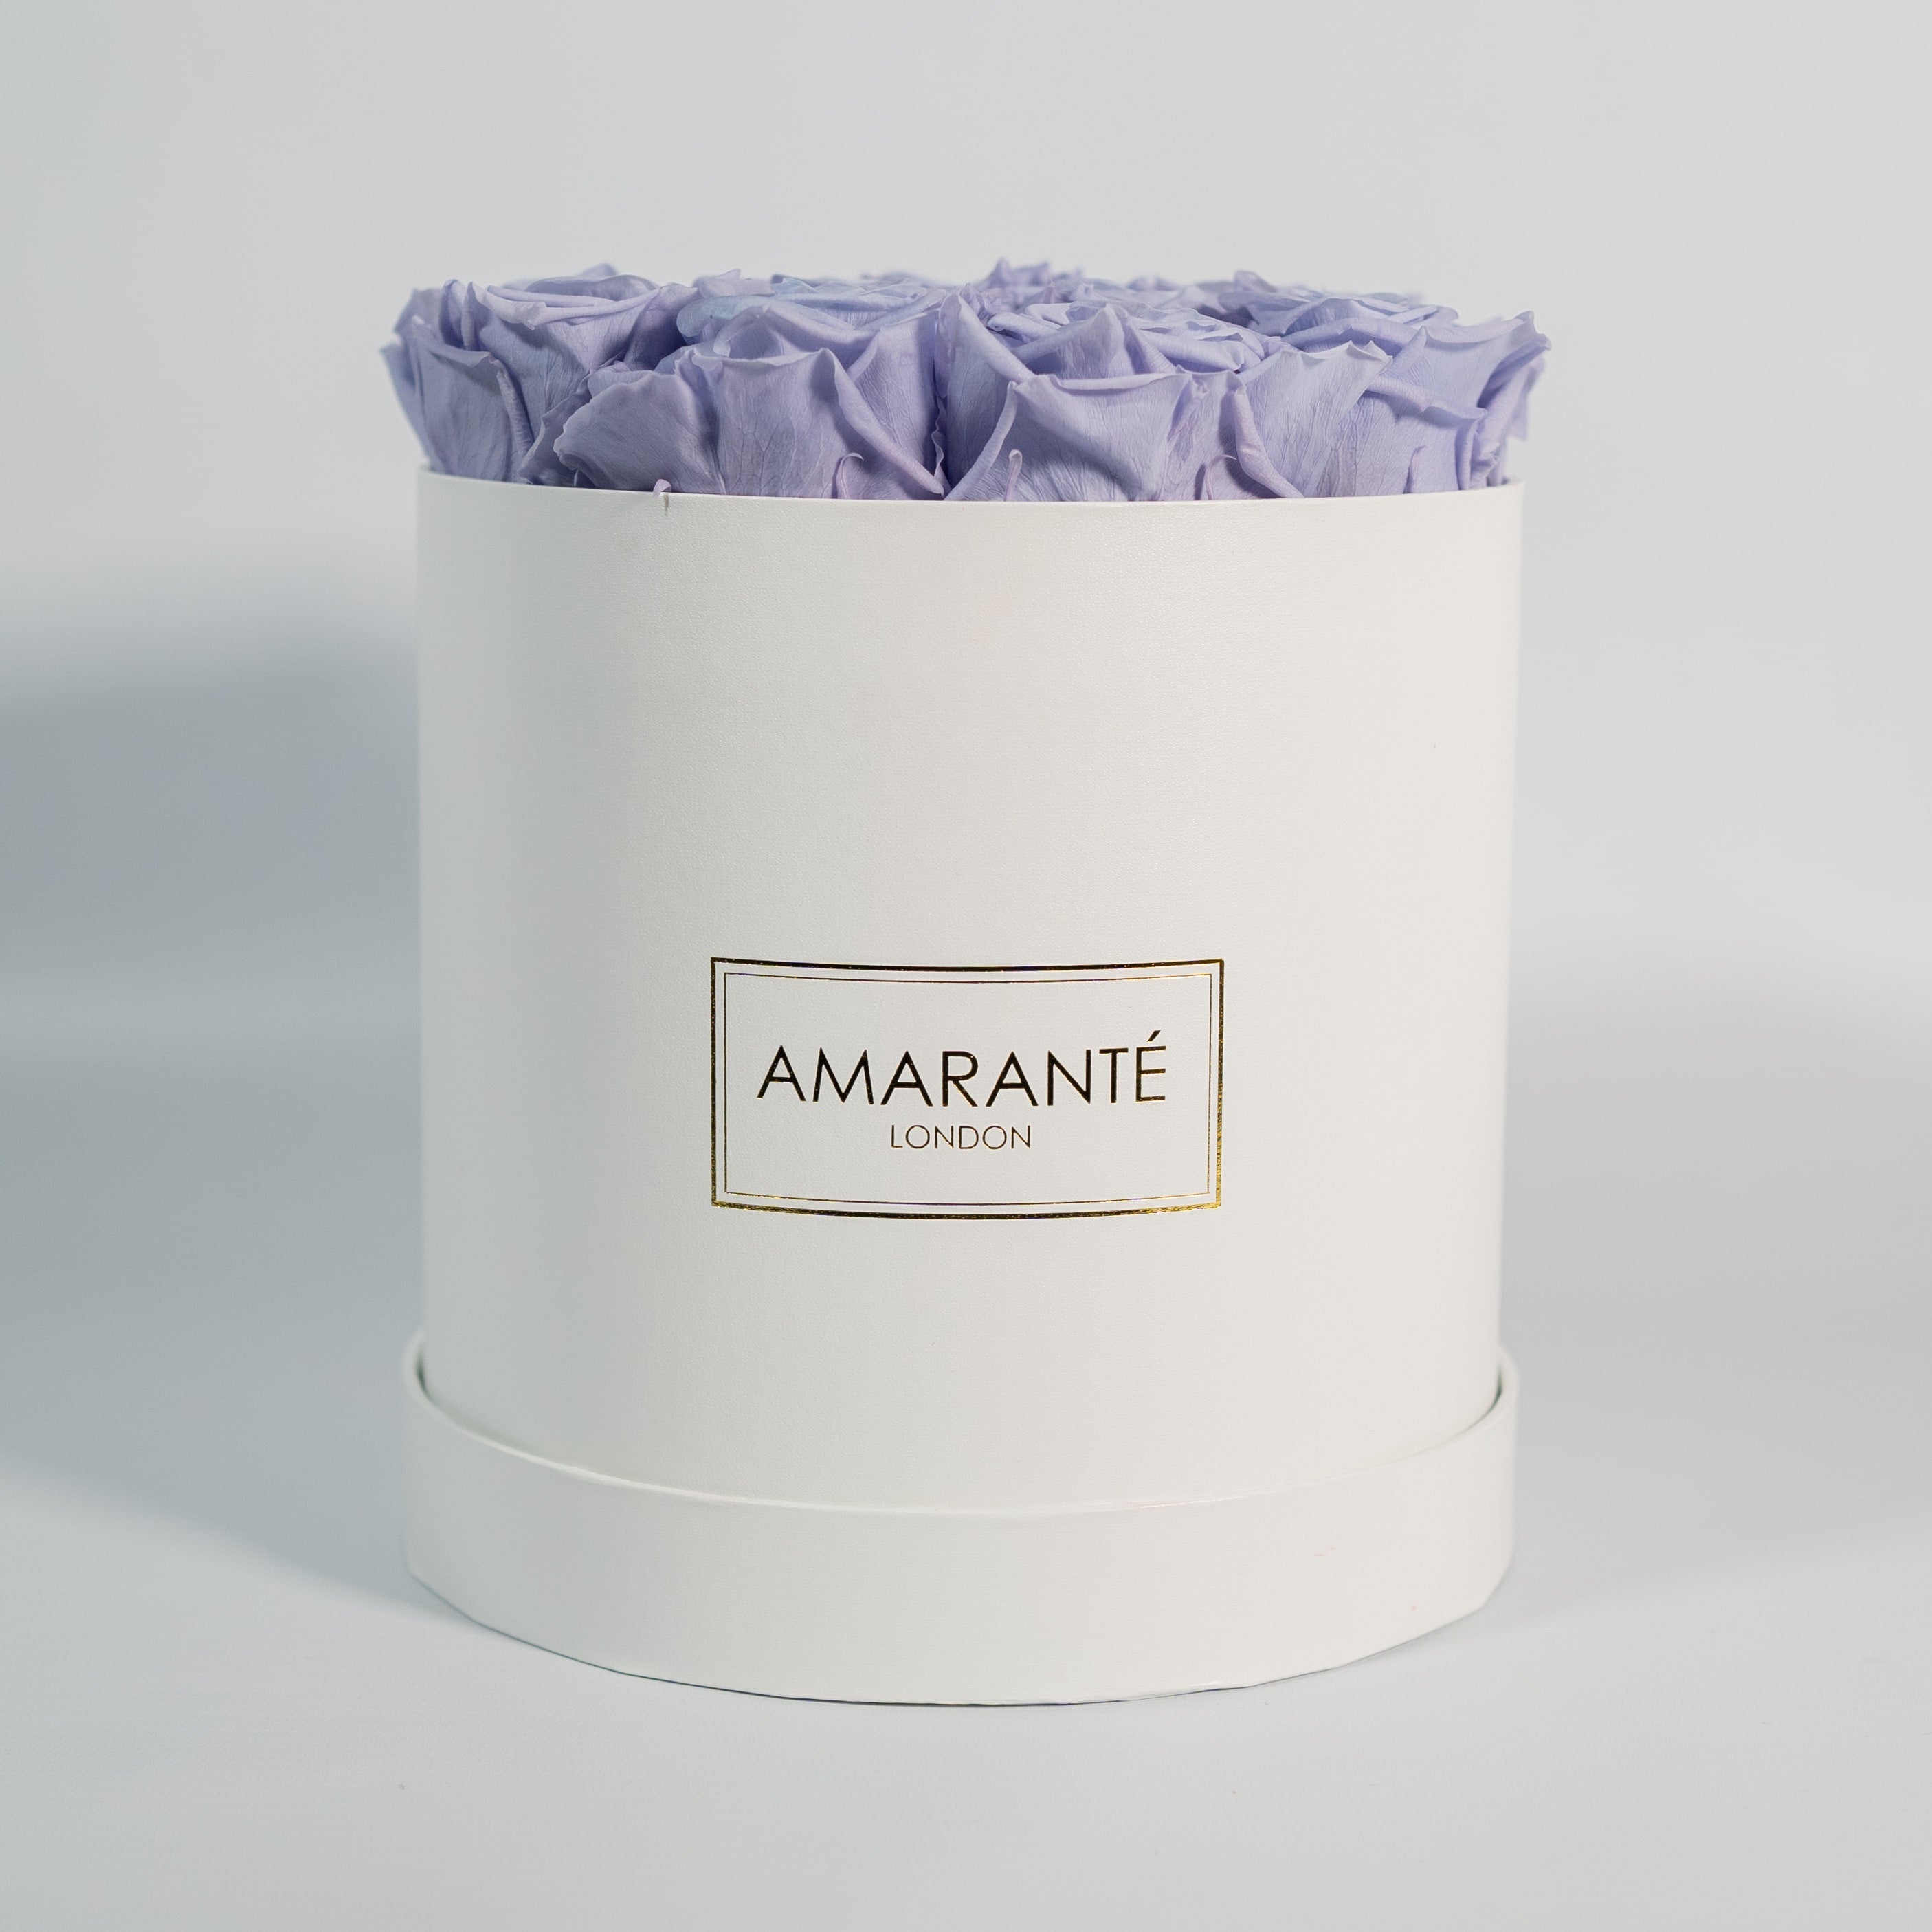 Majestic lavender roses imbedded in a majestic white box 